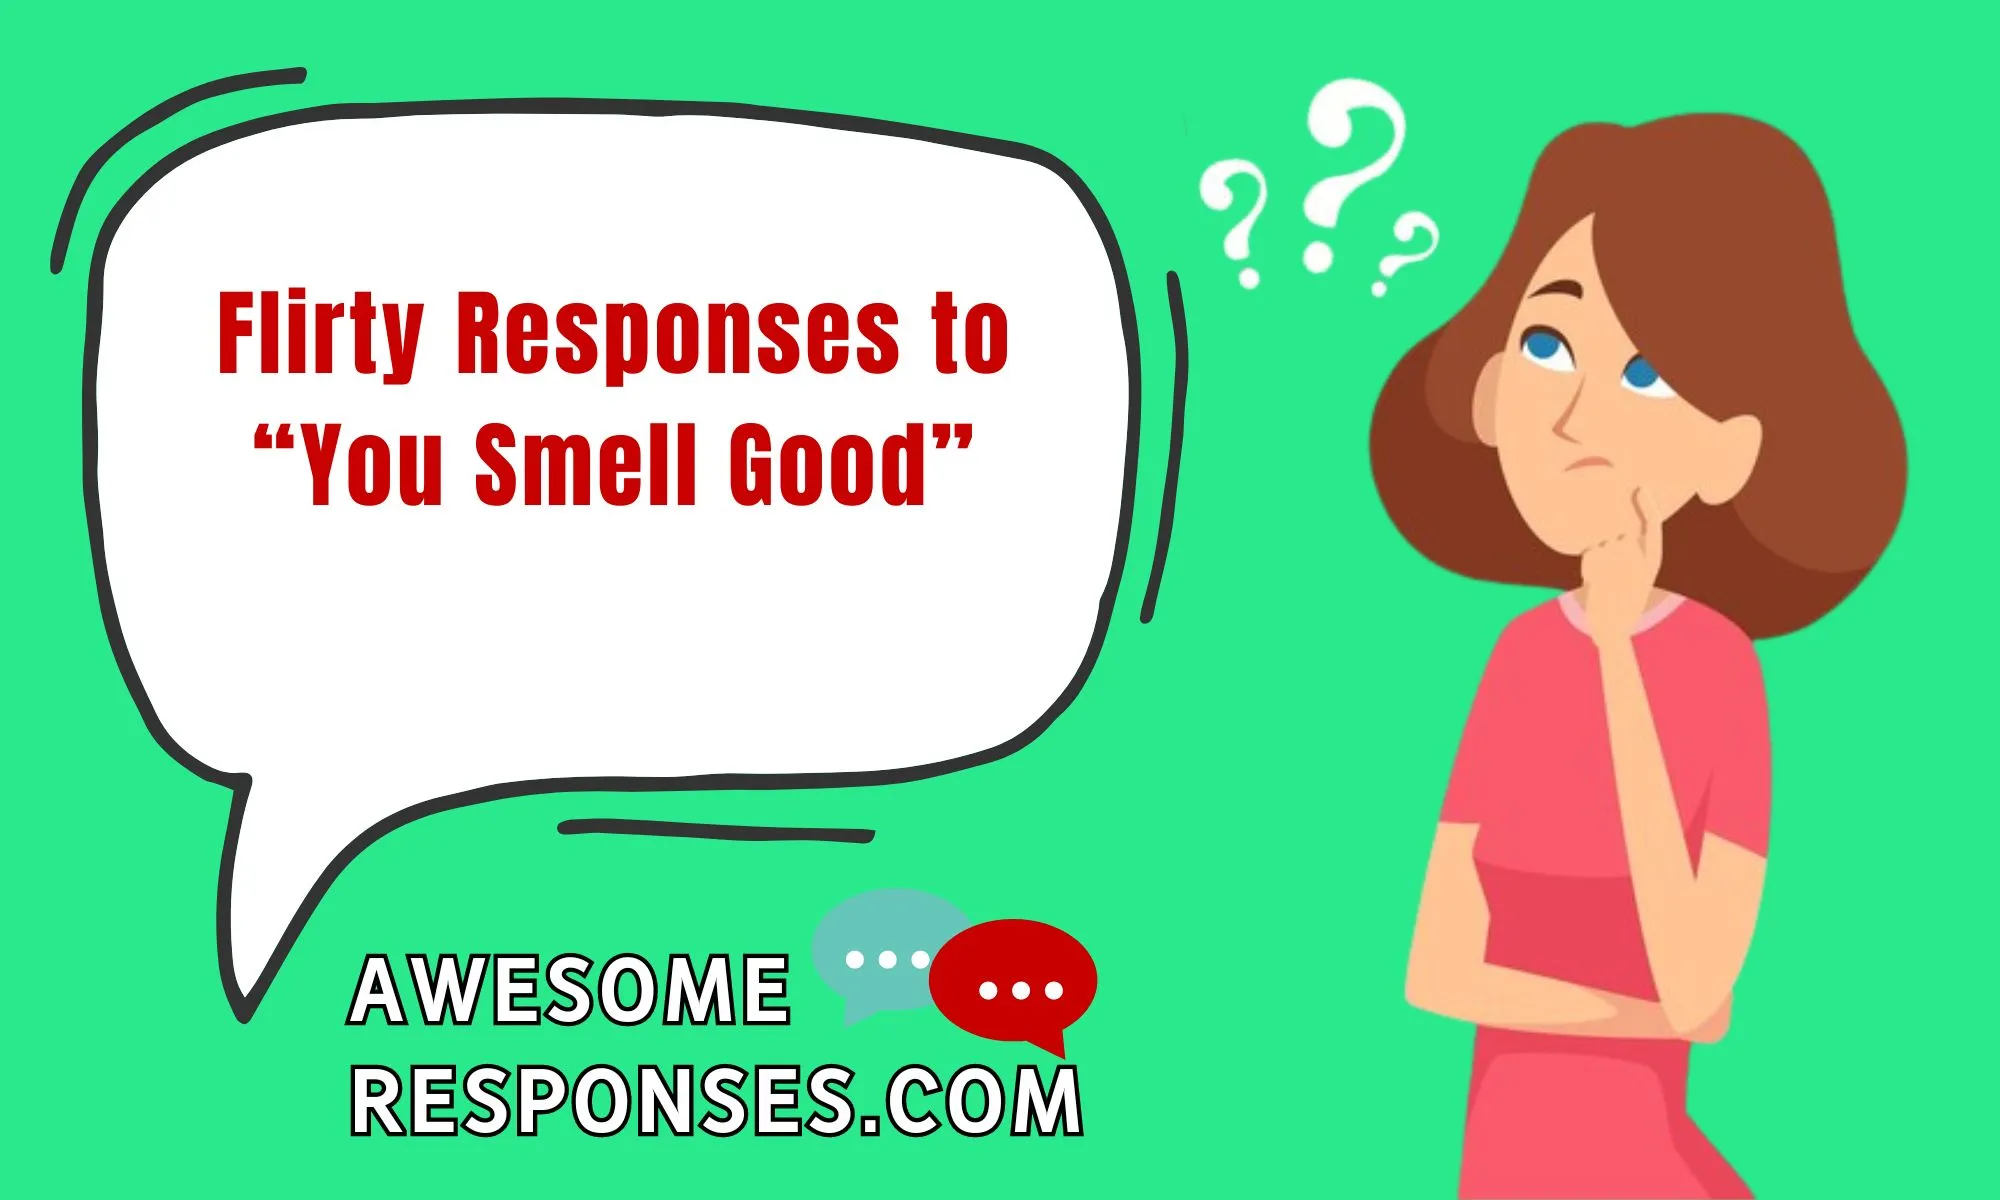 Flirty Responses to “You Smell Good”